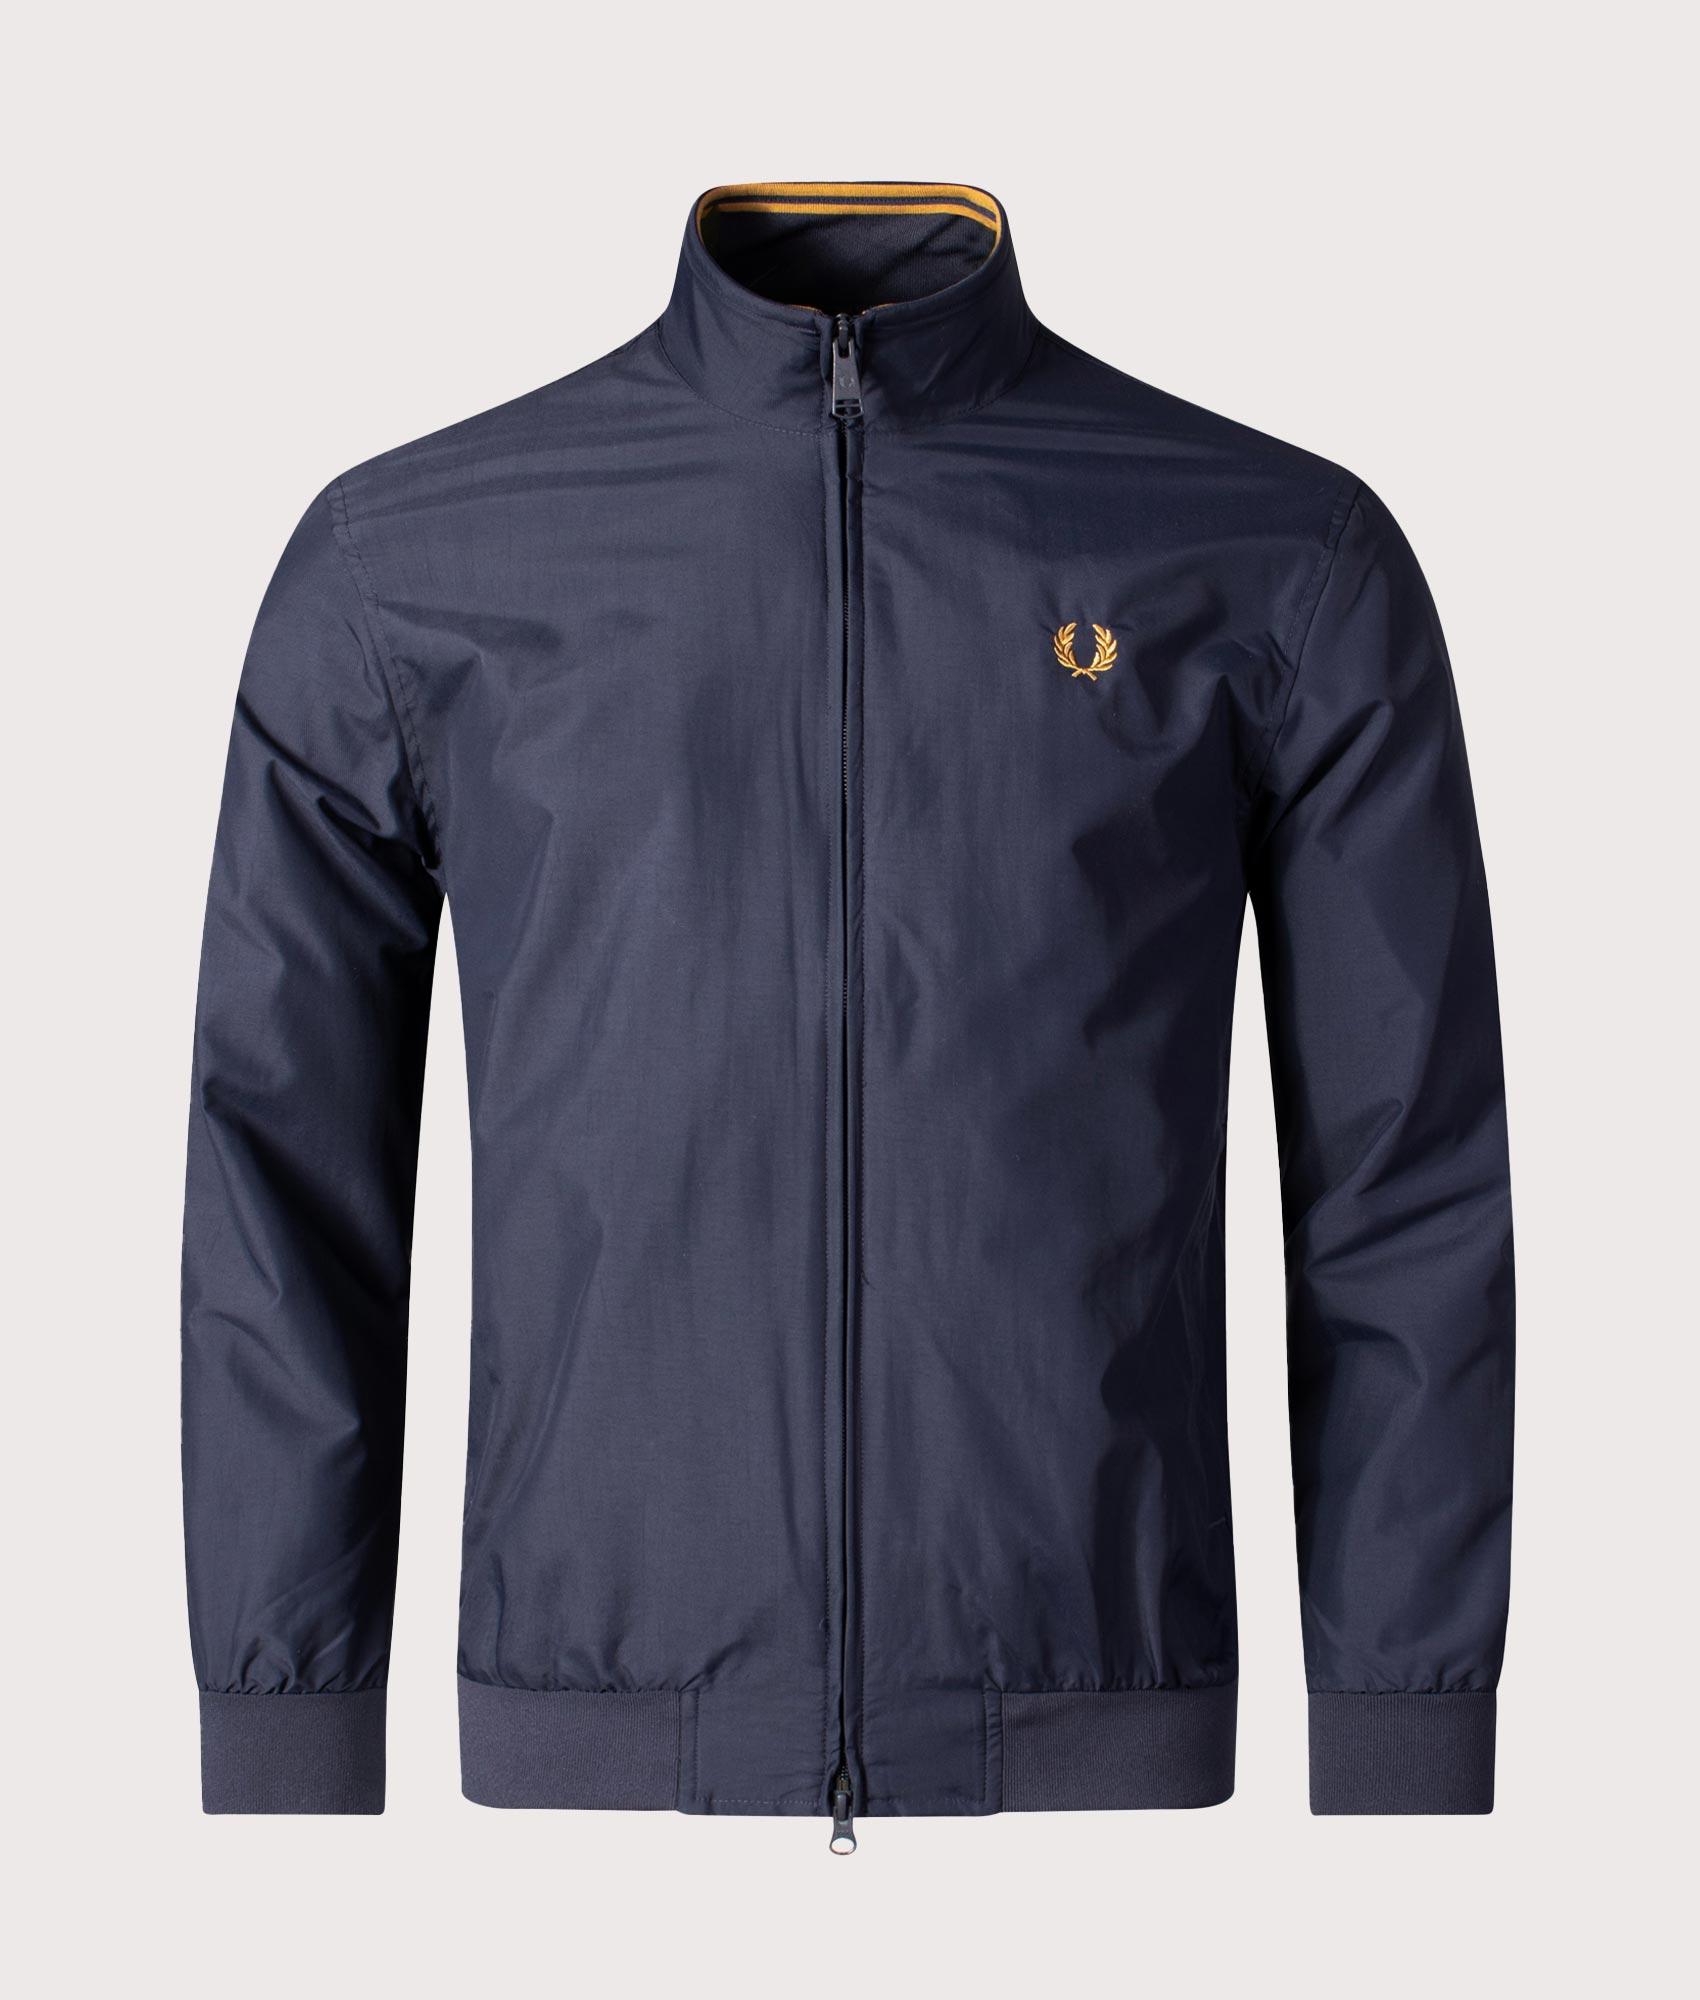 Fred Perry Mens Brentham Jacket - Colour: 608 Navy - Size: Medium